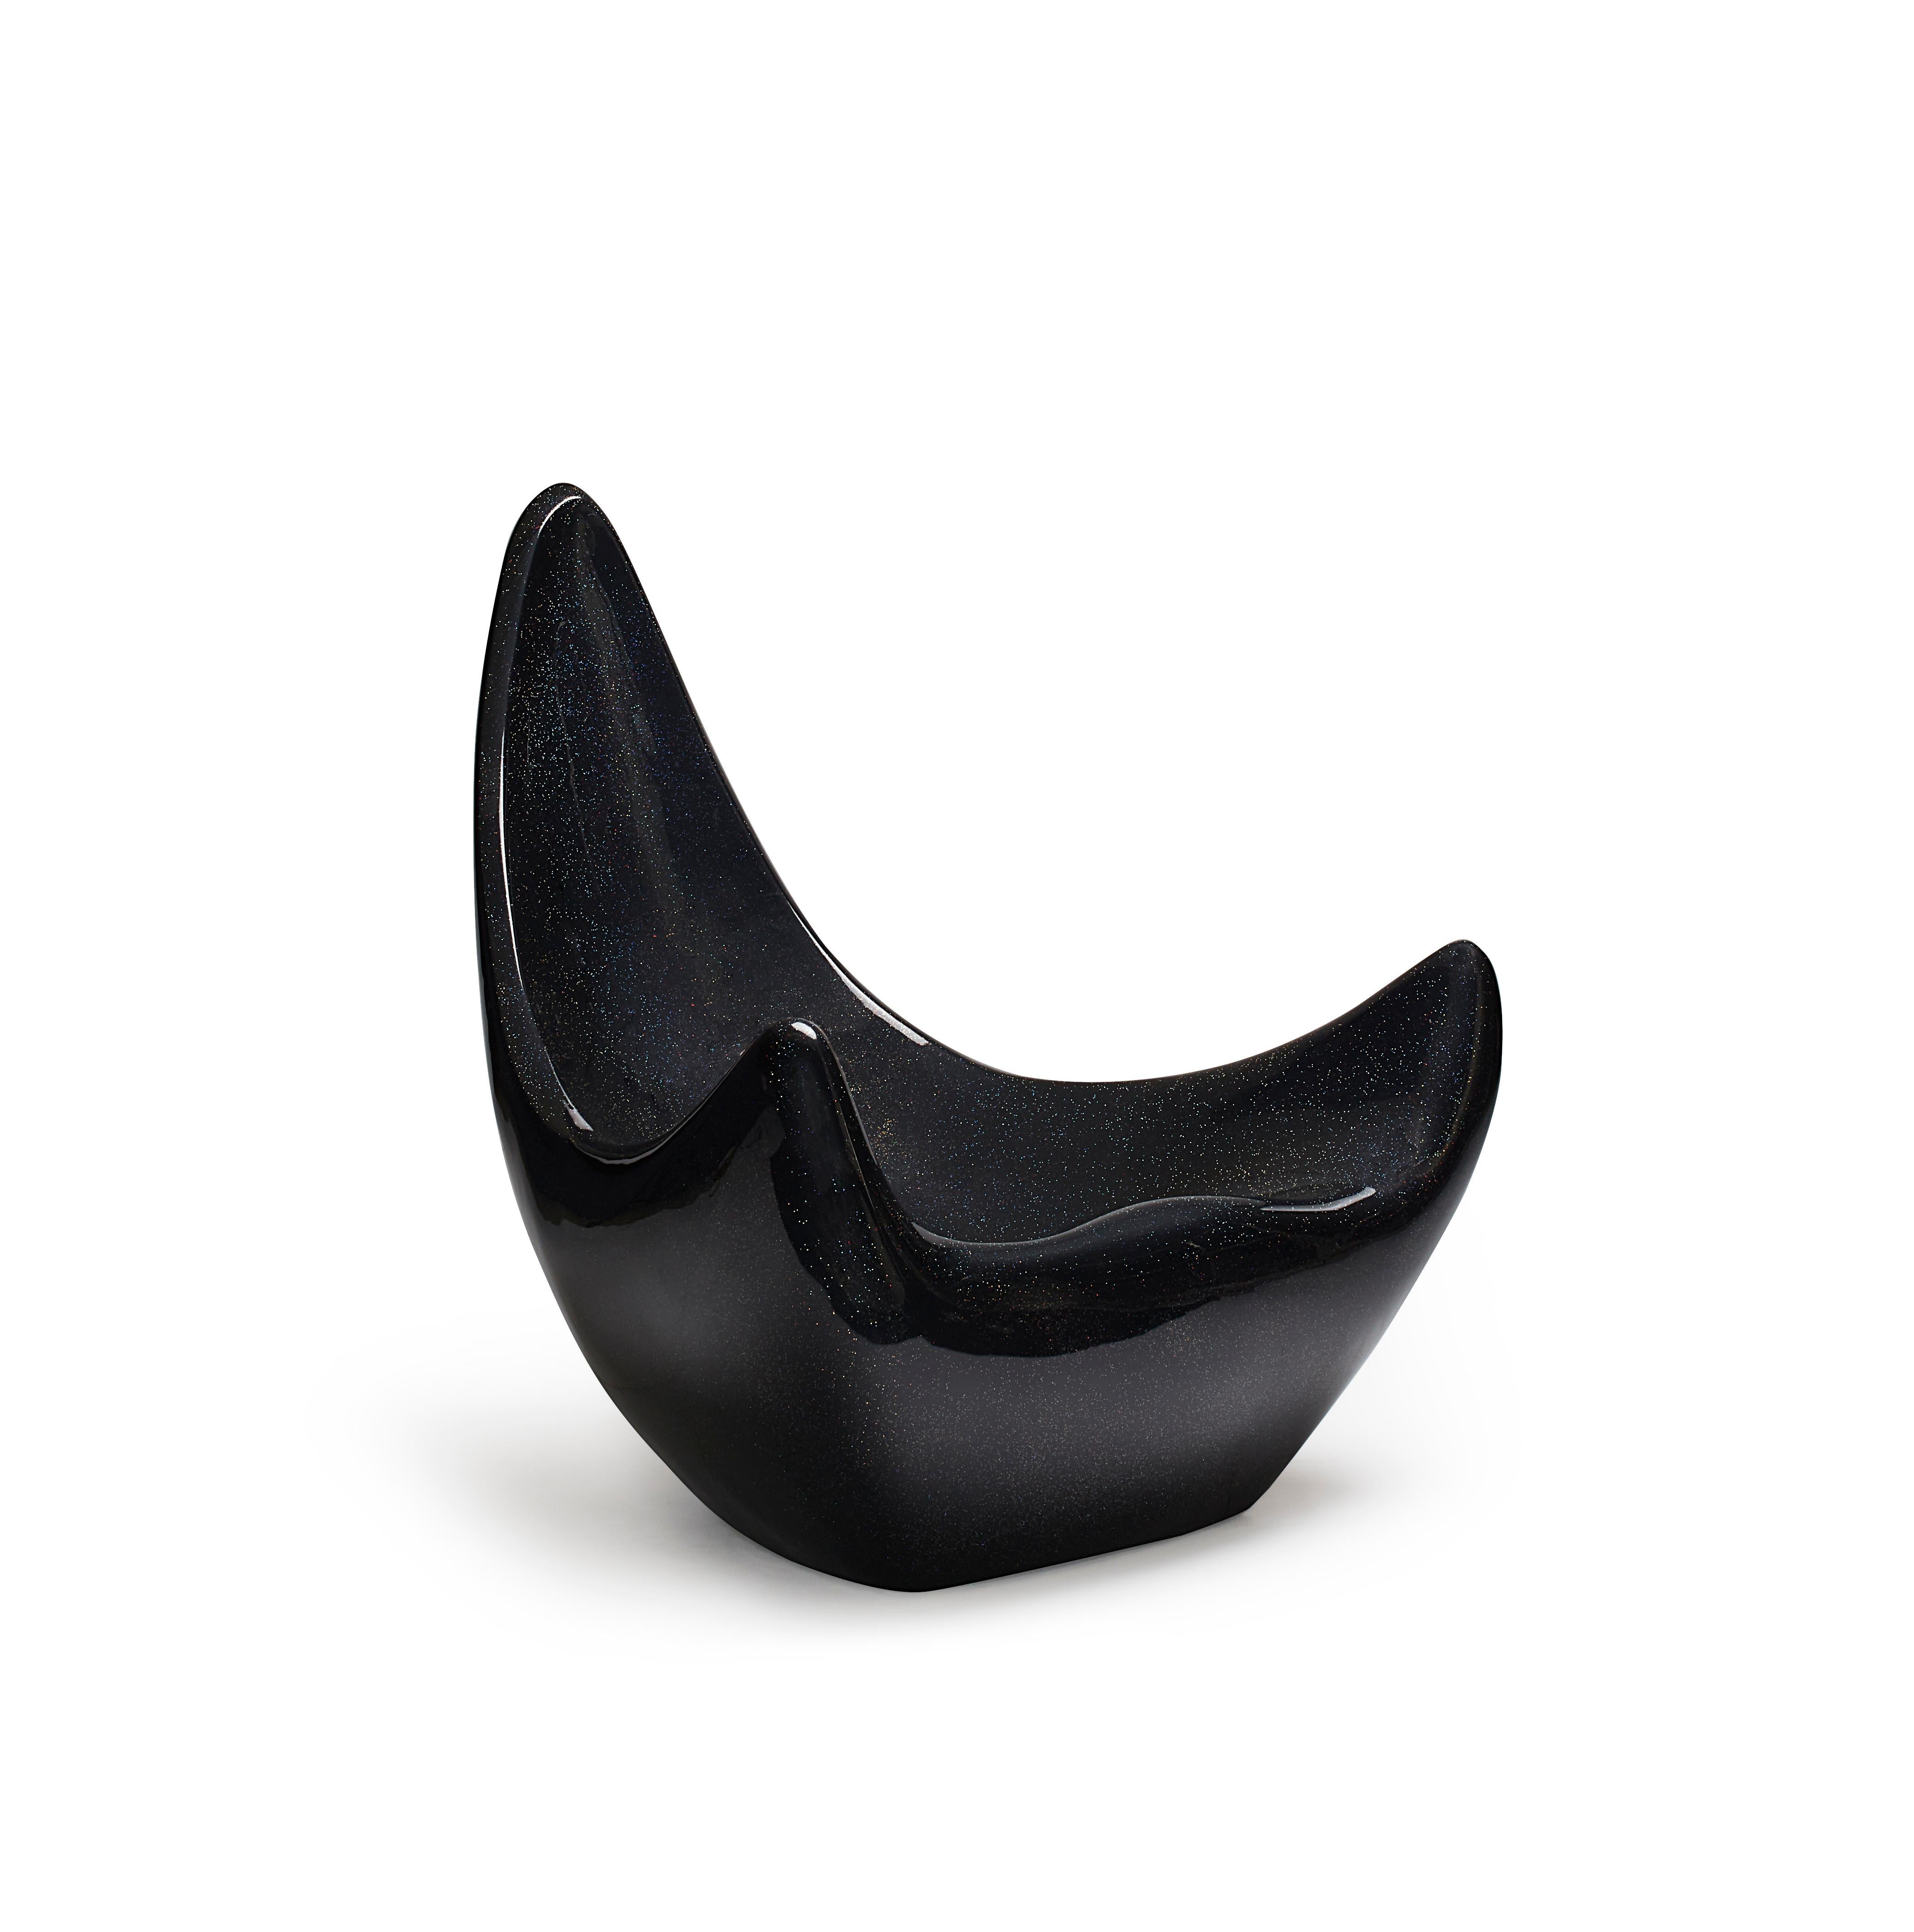 Contemporary, hand sculpted fiberglass armchair - Popcorn Armchair by Kunaal Kyhaan. The sensual form, is imagined in a Galaxy finish with a unique composition of gloss black,  iridescent glitter and stardust mica fragments to recreate the